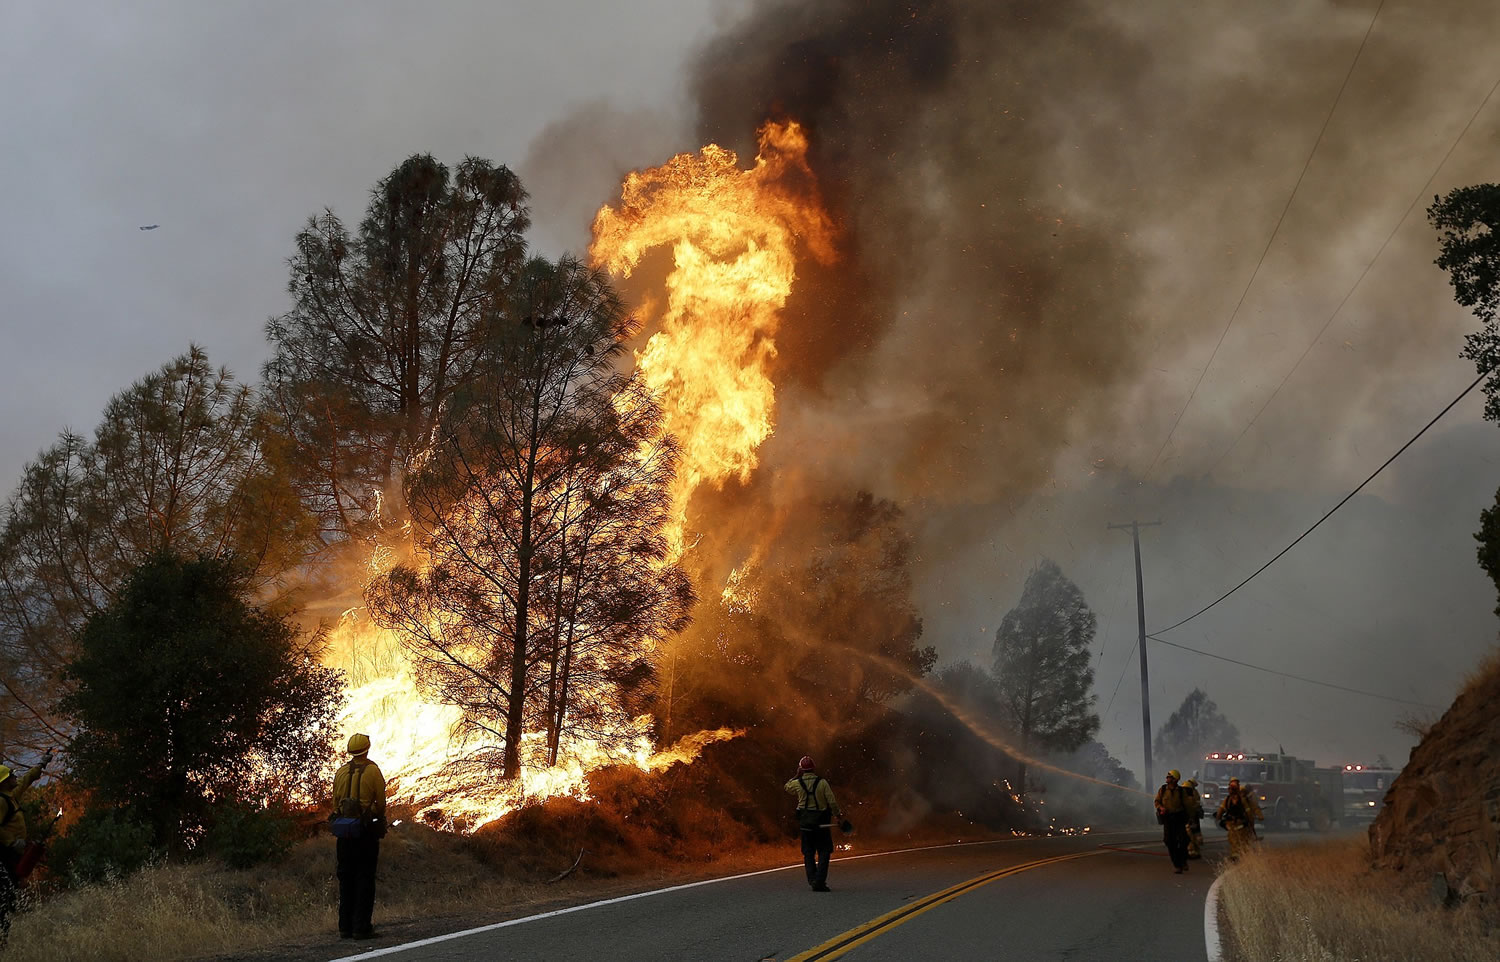 Firefighters spray a hose at a fire along Morgan Valley Road near Lower Lake, Calif., on Friday.